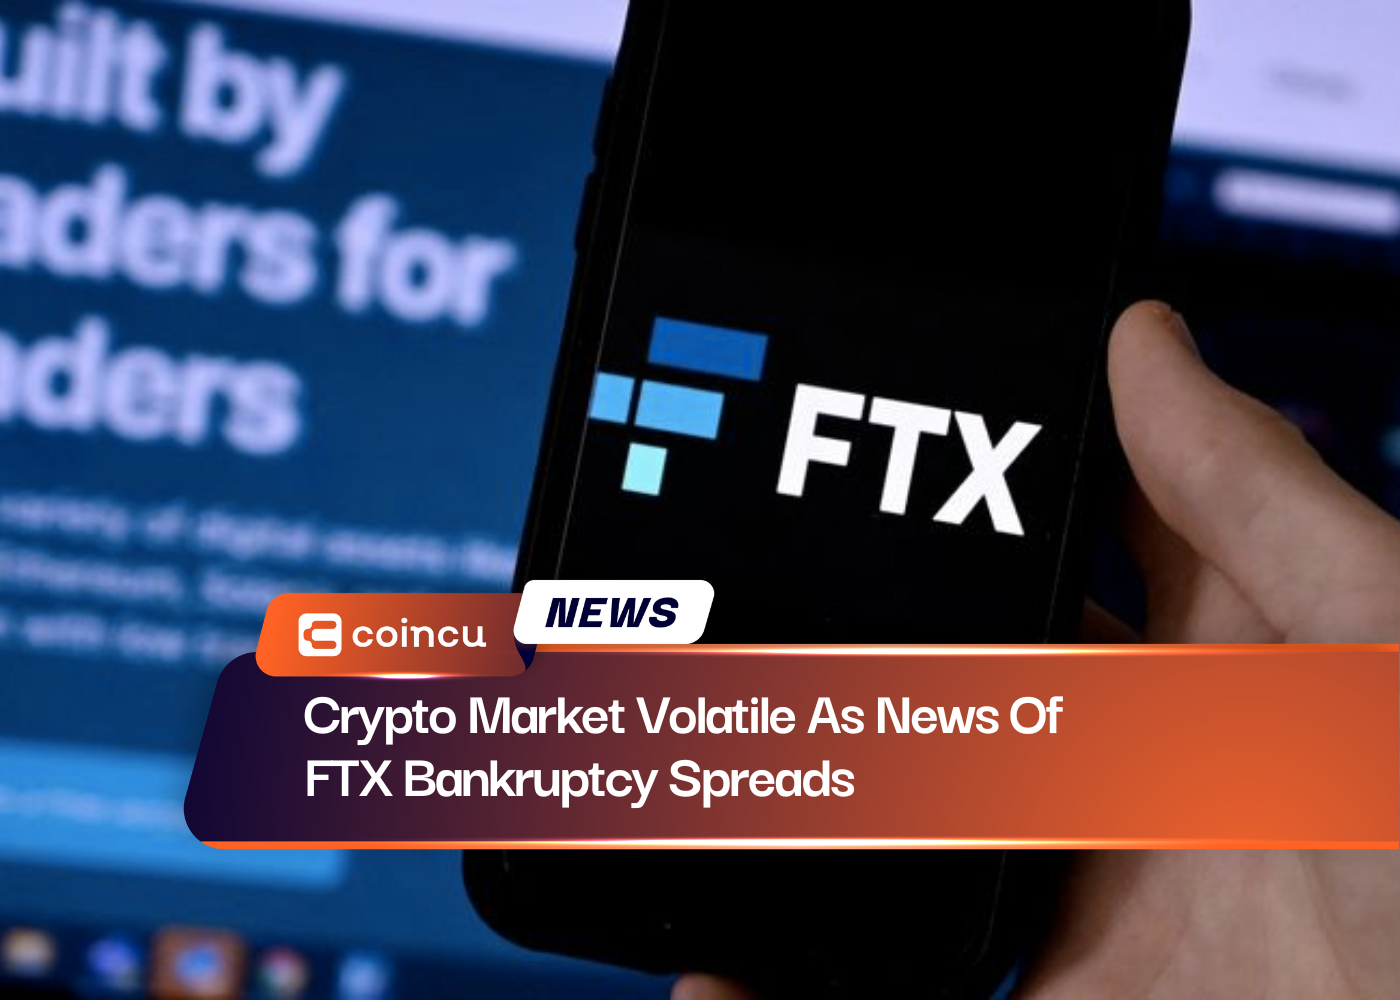 Crypto Market Volatile As News Of FTX Bankruptcy Spreads